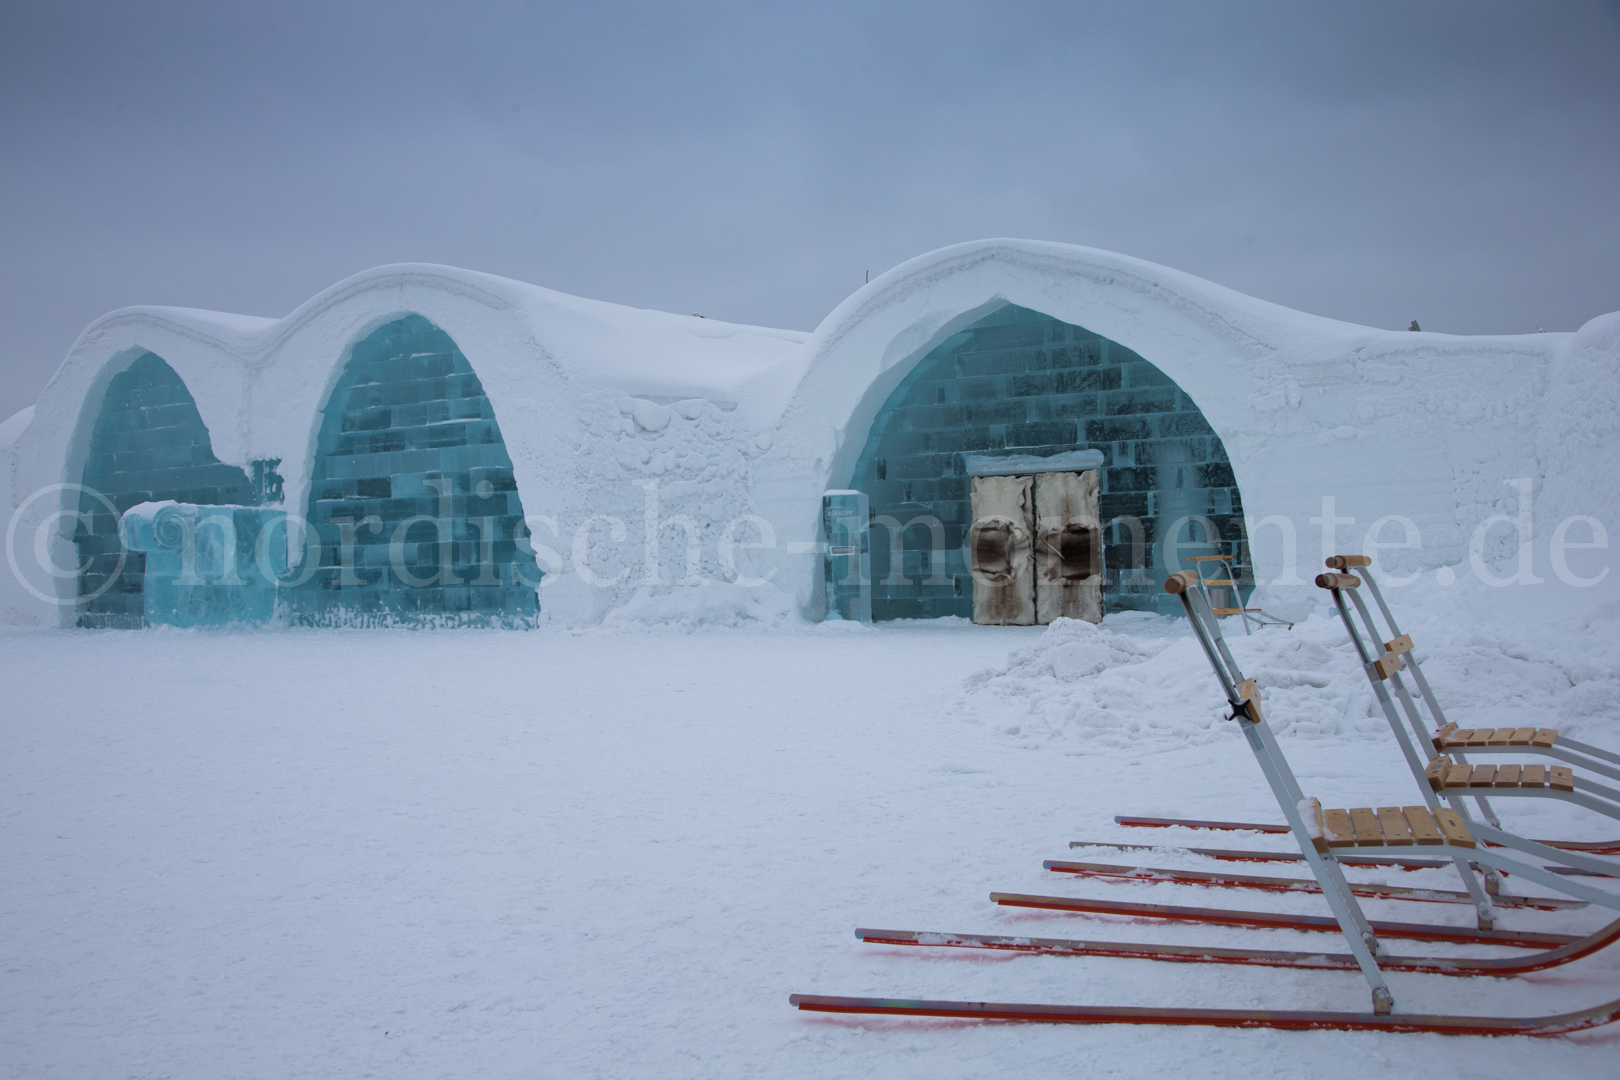 Icehotel 2014